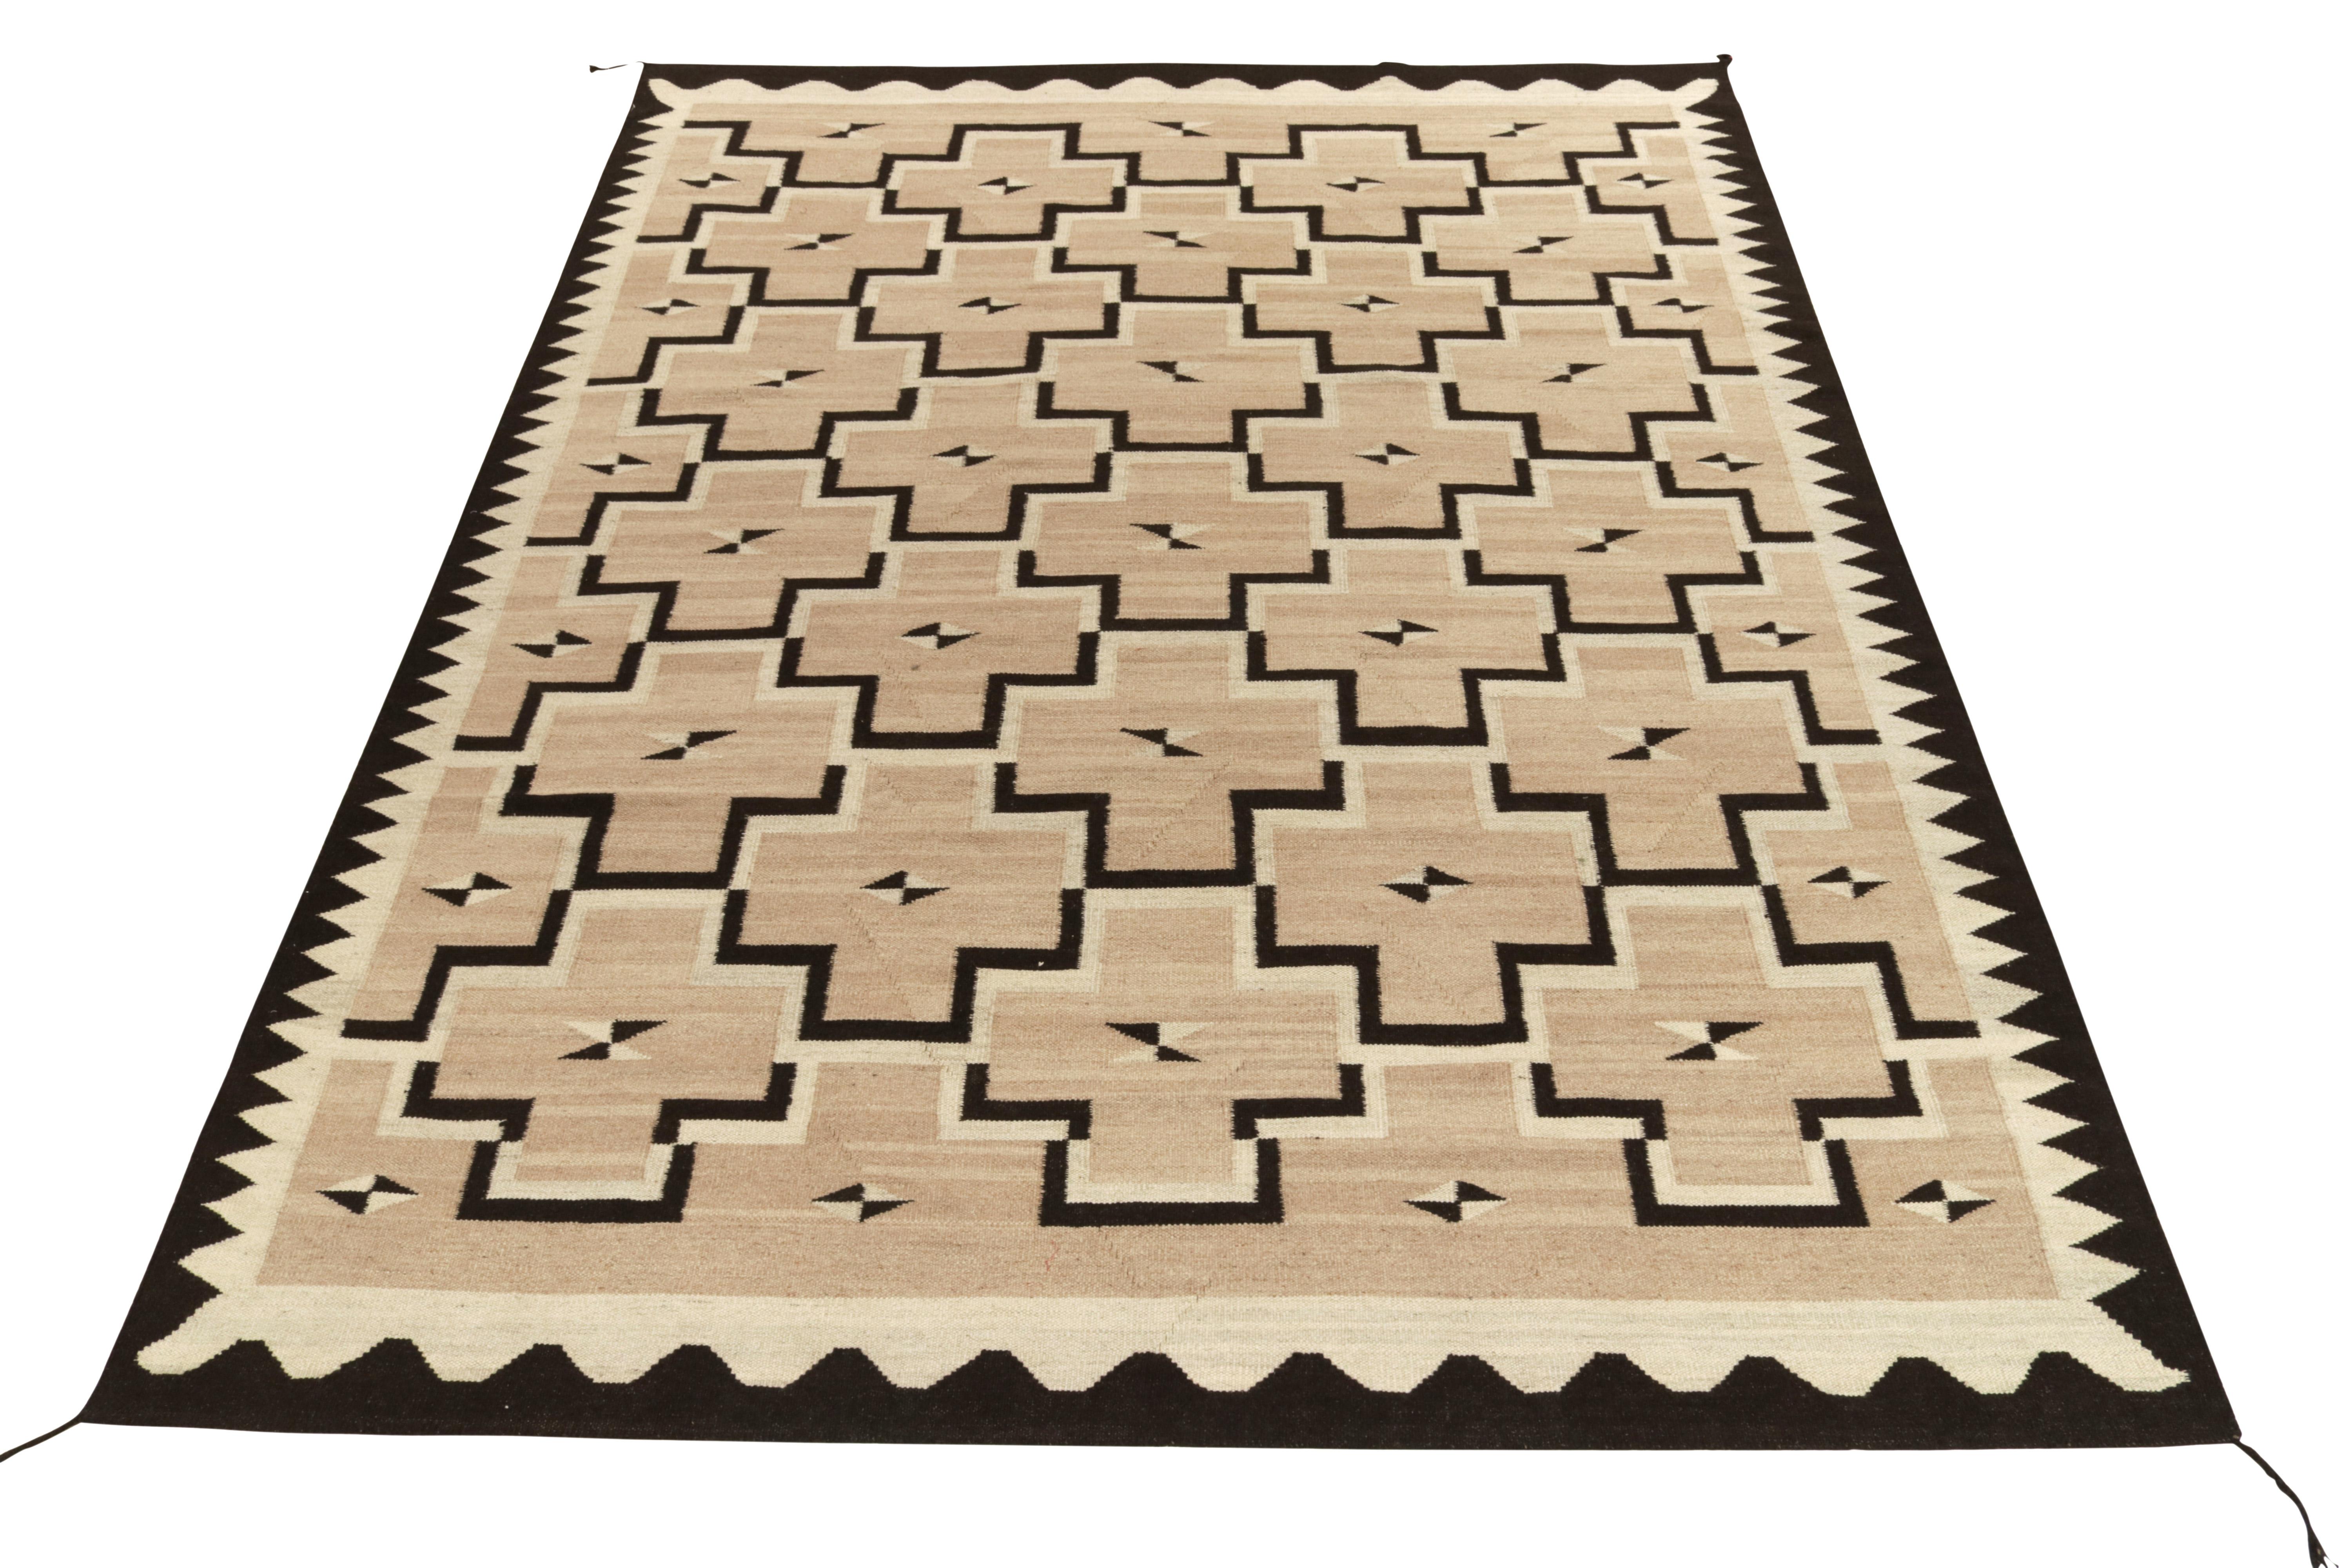 Handwoven in fine quality wool, a spacious 9x12 ode to the Navajo Kilim rug connoting the union of tribal & modern aesthetics. Inspired by the 1920s Navajo flatweaves in a modern approach, this rug showcases sharp geometric patterns in scintillating